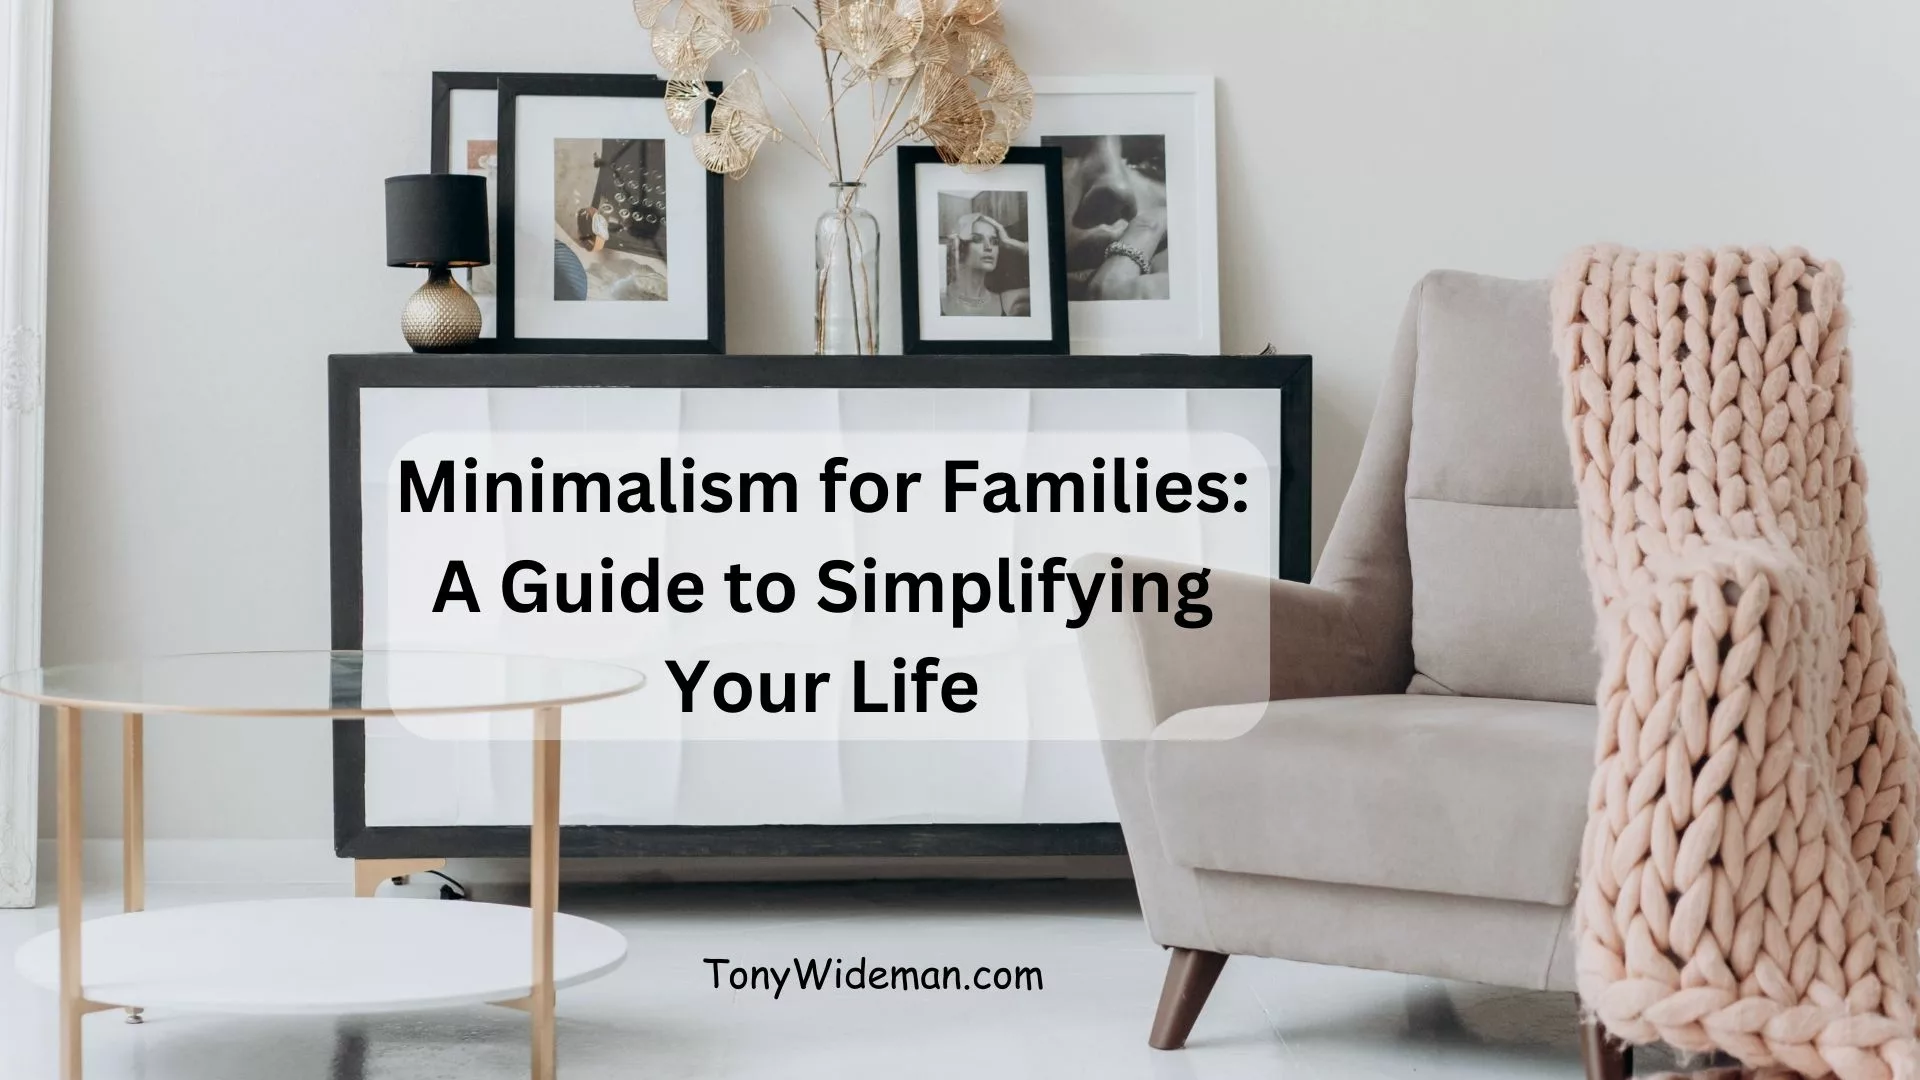 Minimalism for Families: A Guide to Simplifying Your Life